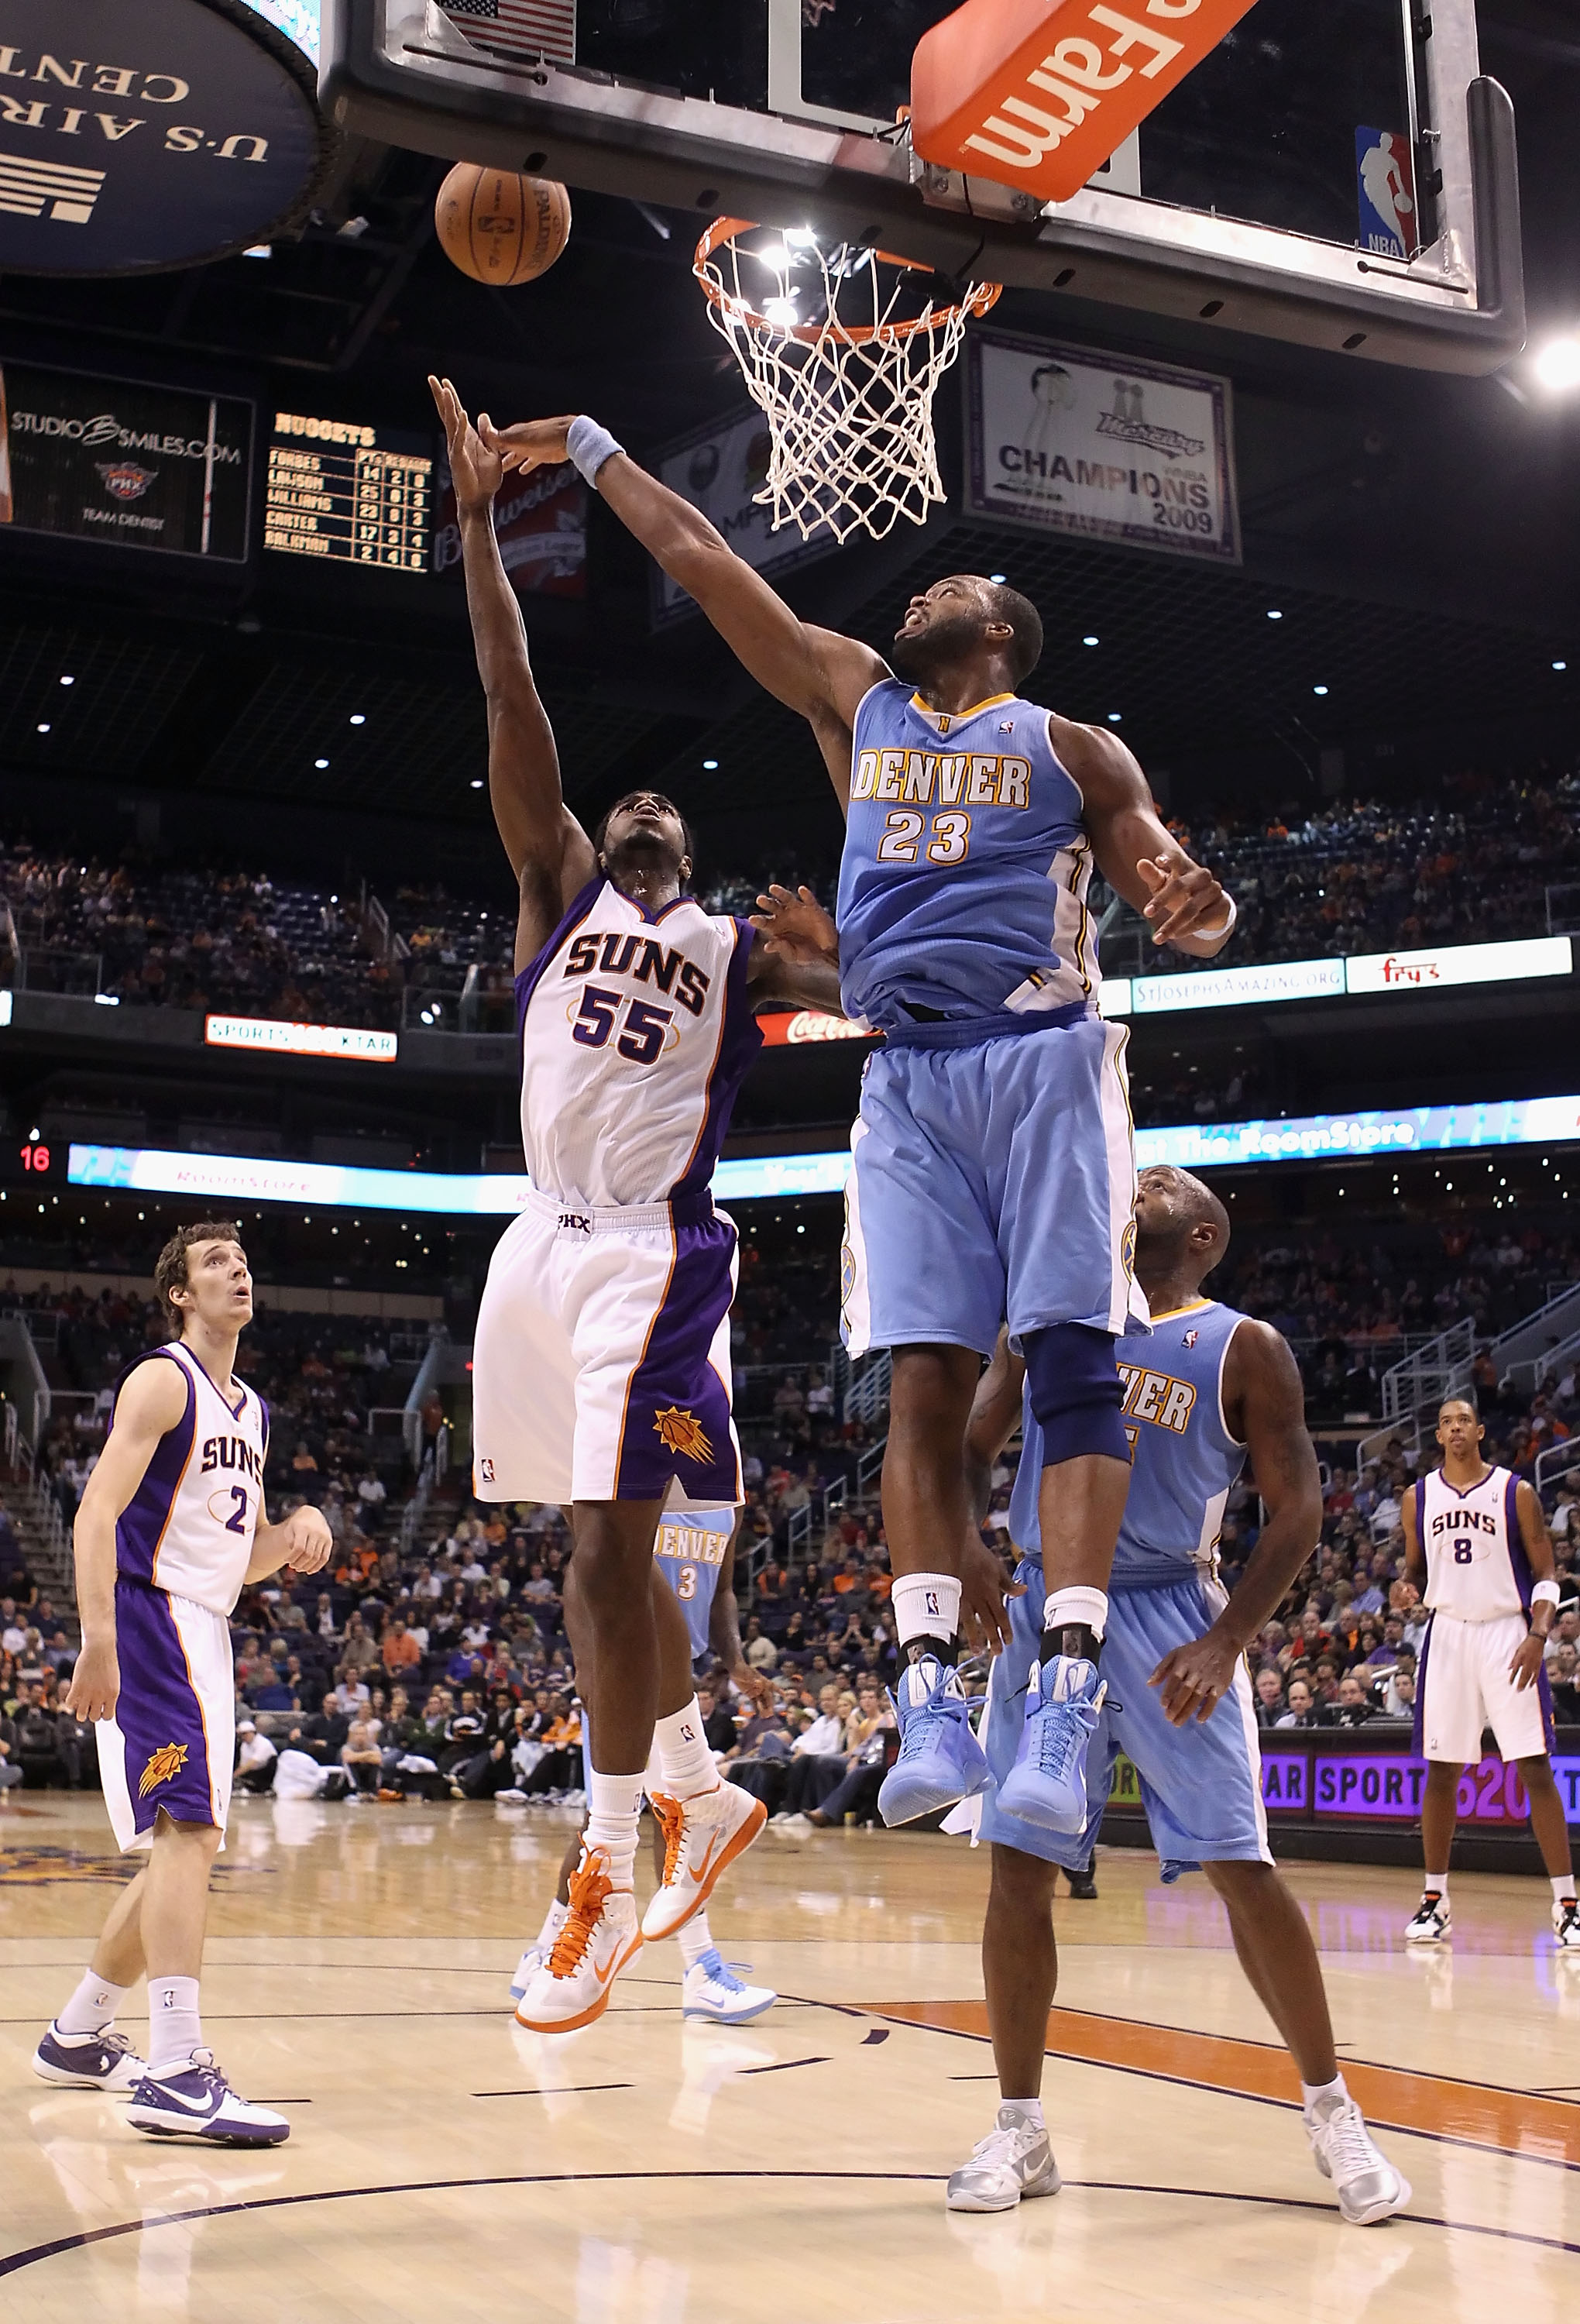 PHOENIX - OCTOBER 22:  Earl Clark #55 of the Phoenix Suns puts up a shot against Shelden Williams #23 of the Denver Nuggets during the preseason NBA game at US Airways Center on October 22, 2010 in Phoenix, Arizona. NOTE TO USER: User expressly acknowledg